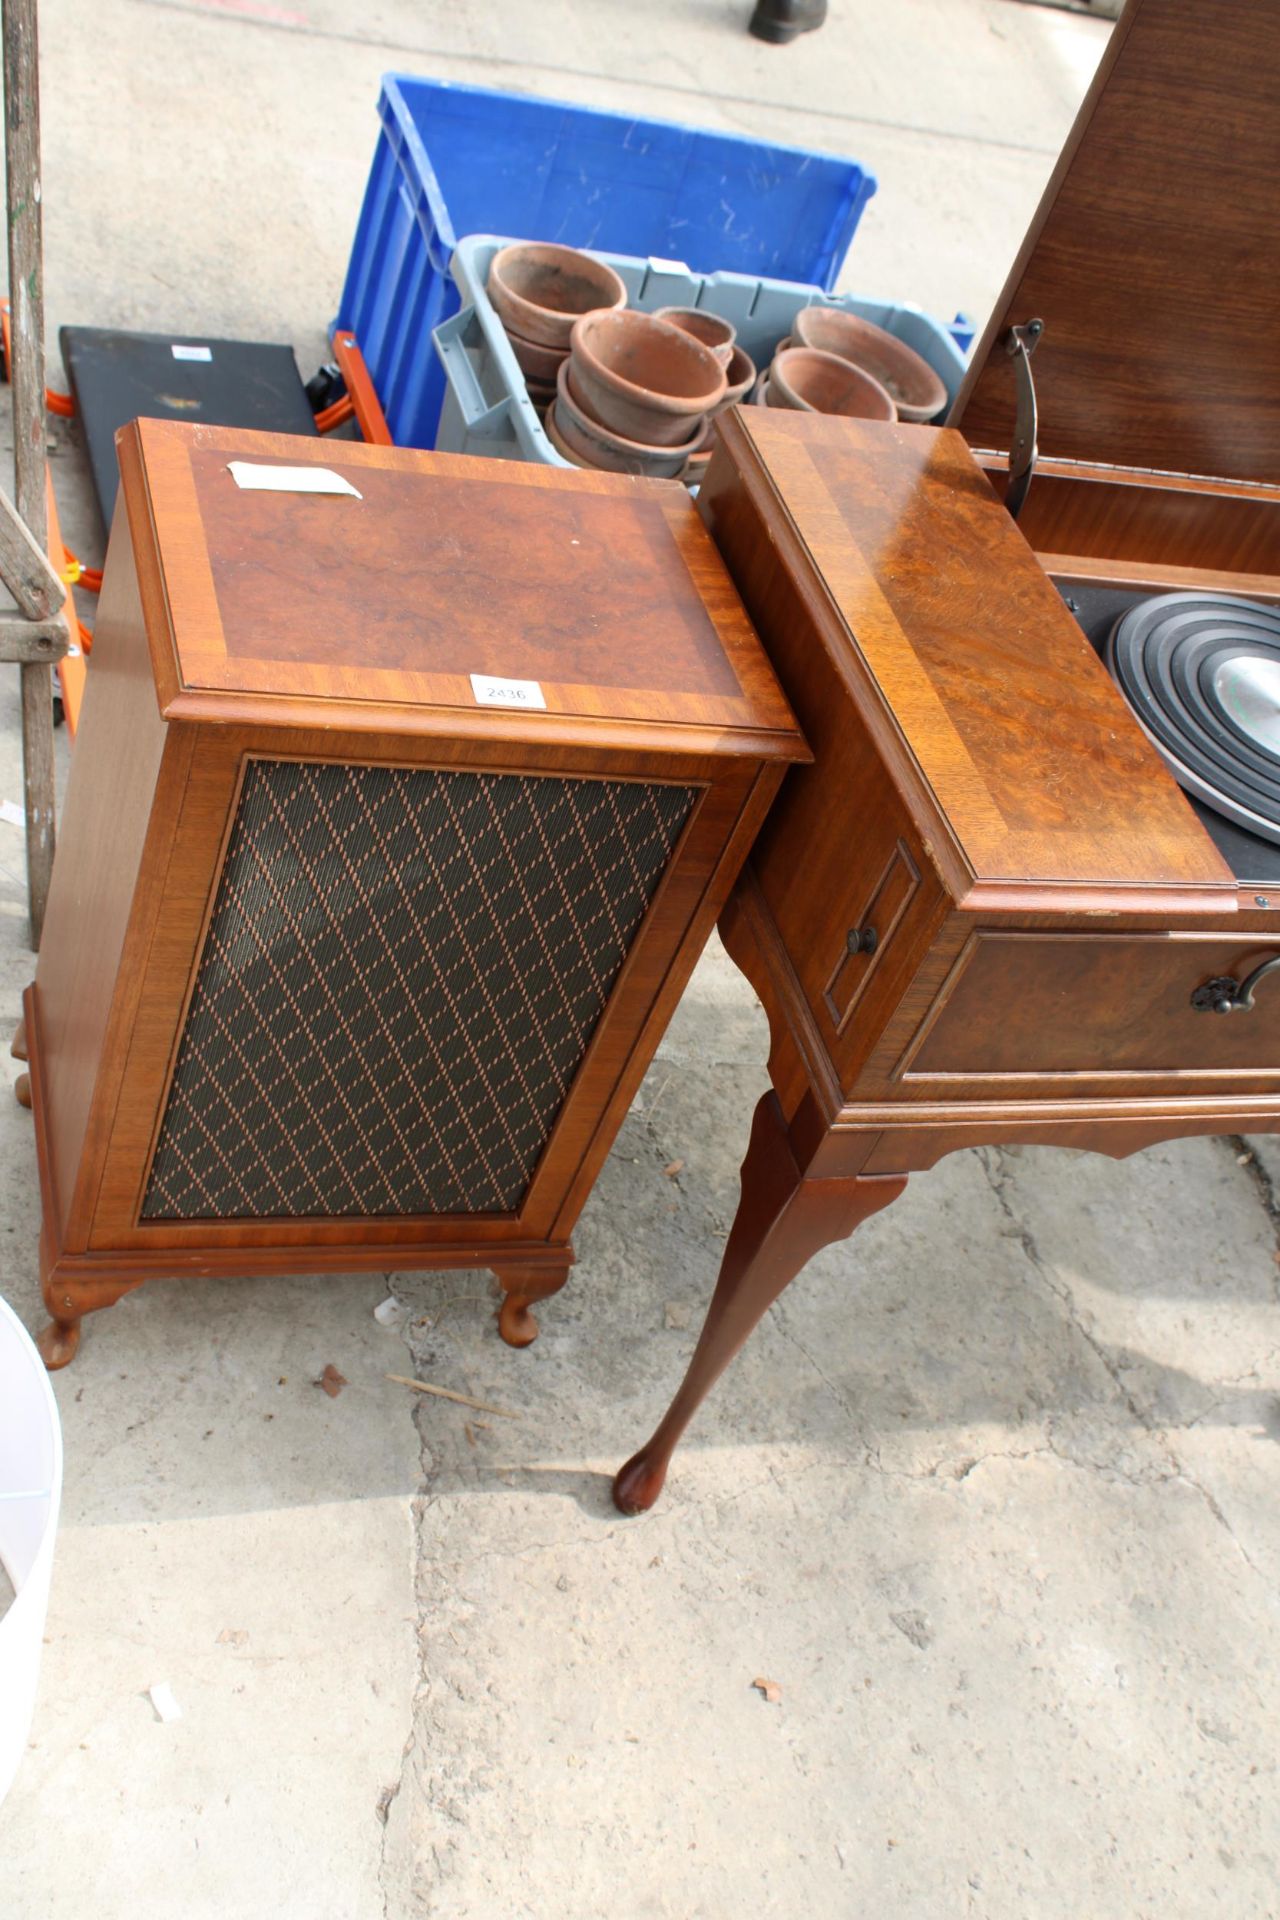 A VINTAGE MID CENTURY RADIOGRAM WITH A DRAYTON DECK AND SPEAKERS - Bild 4 aus 6